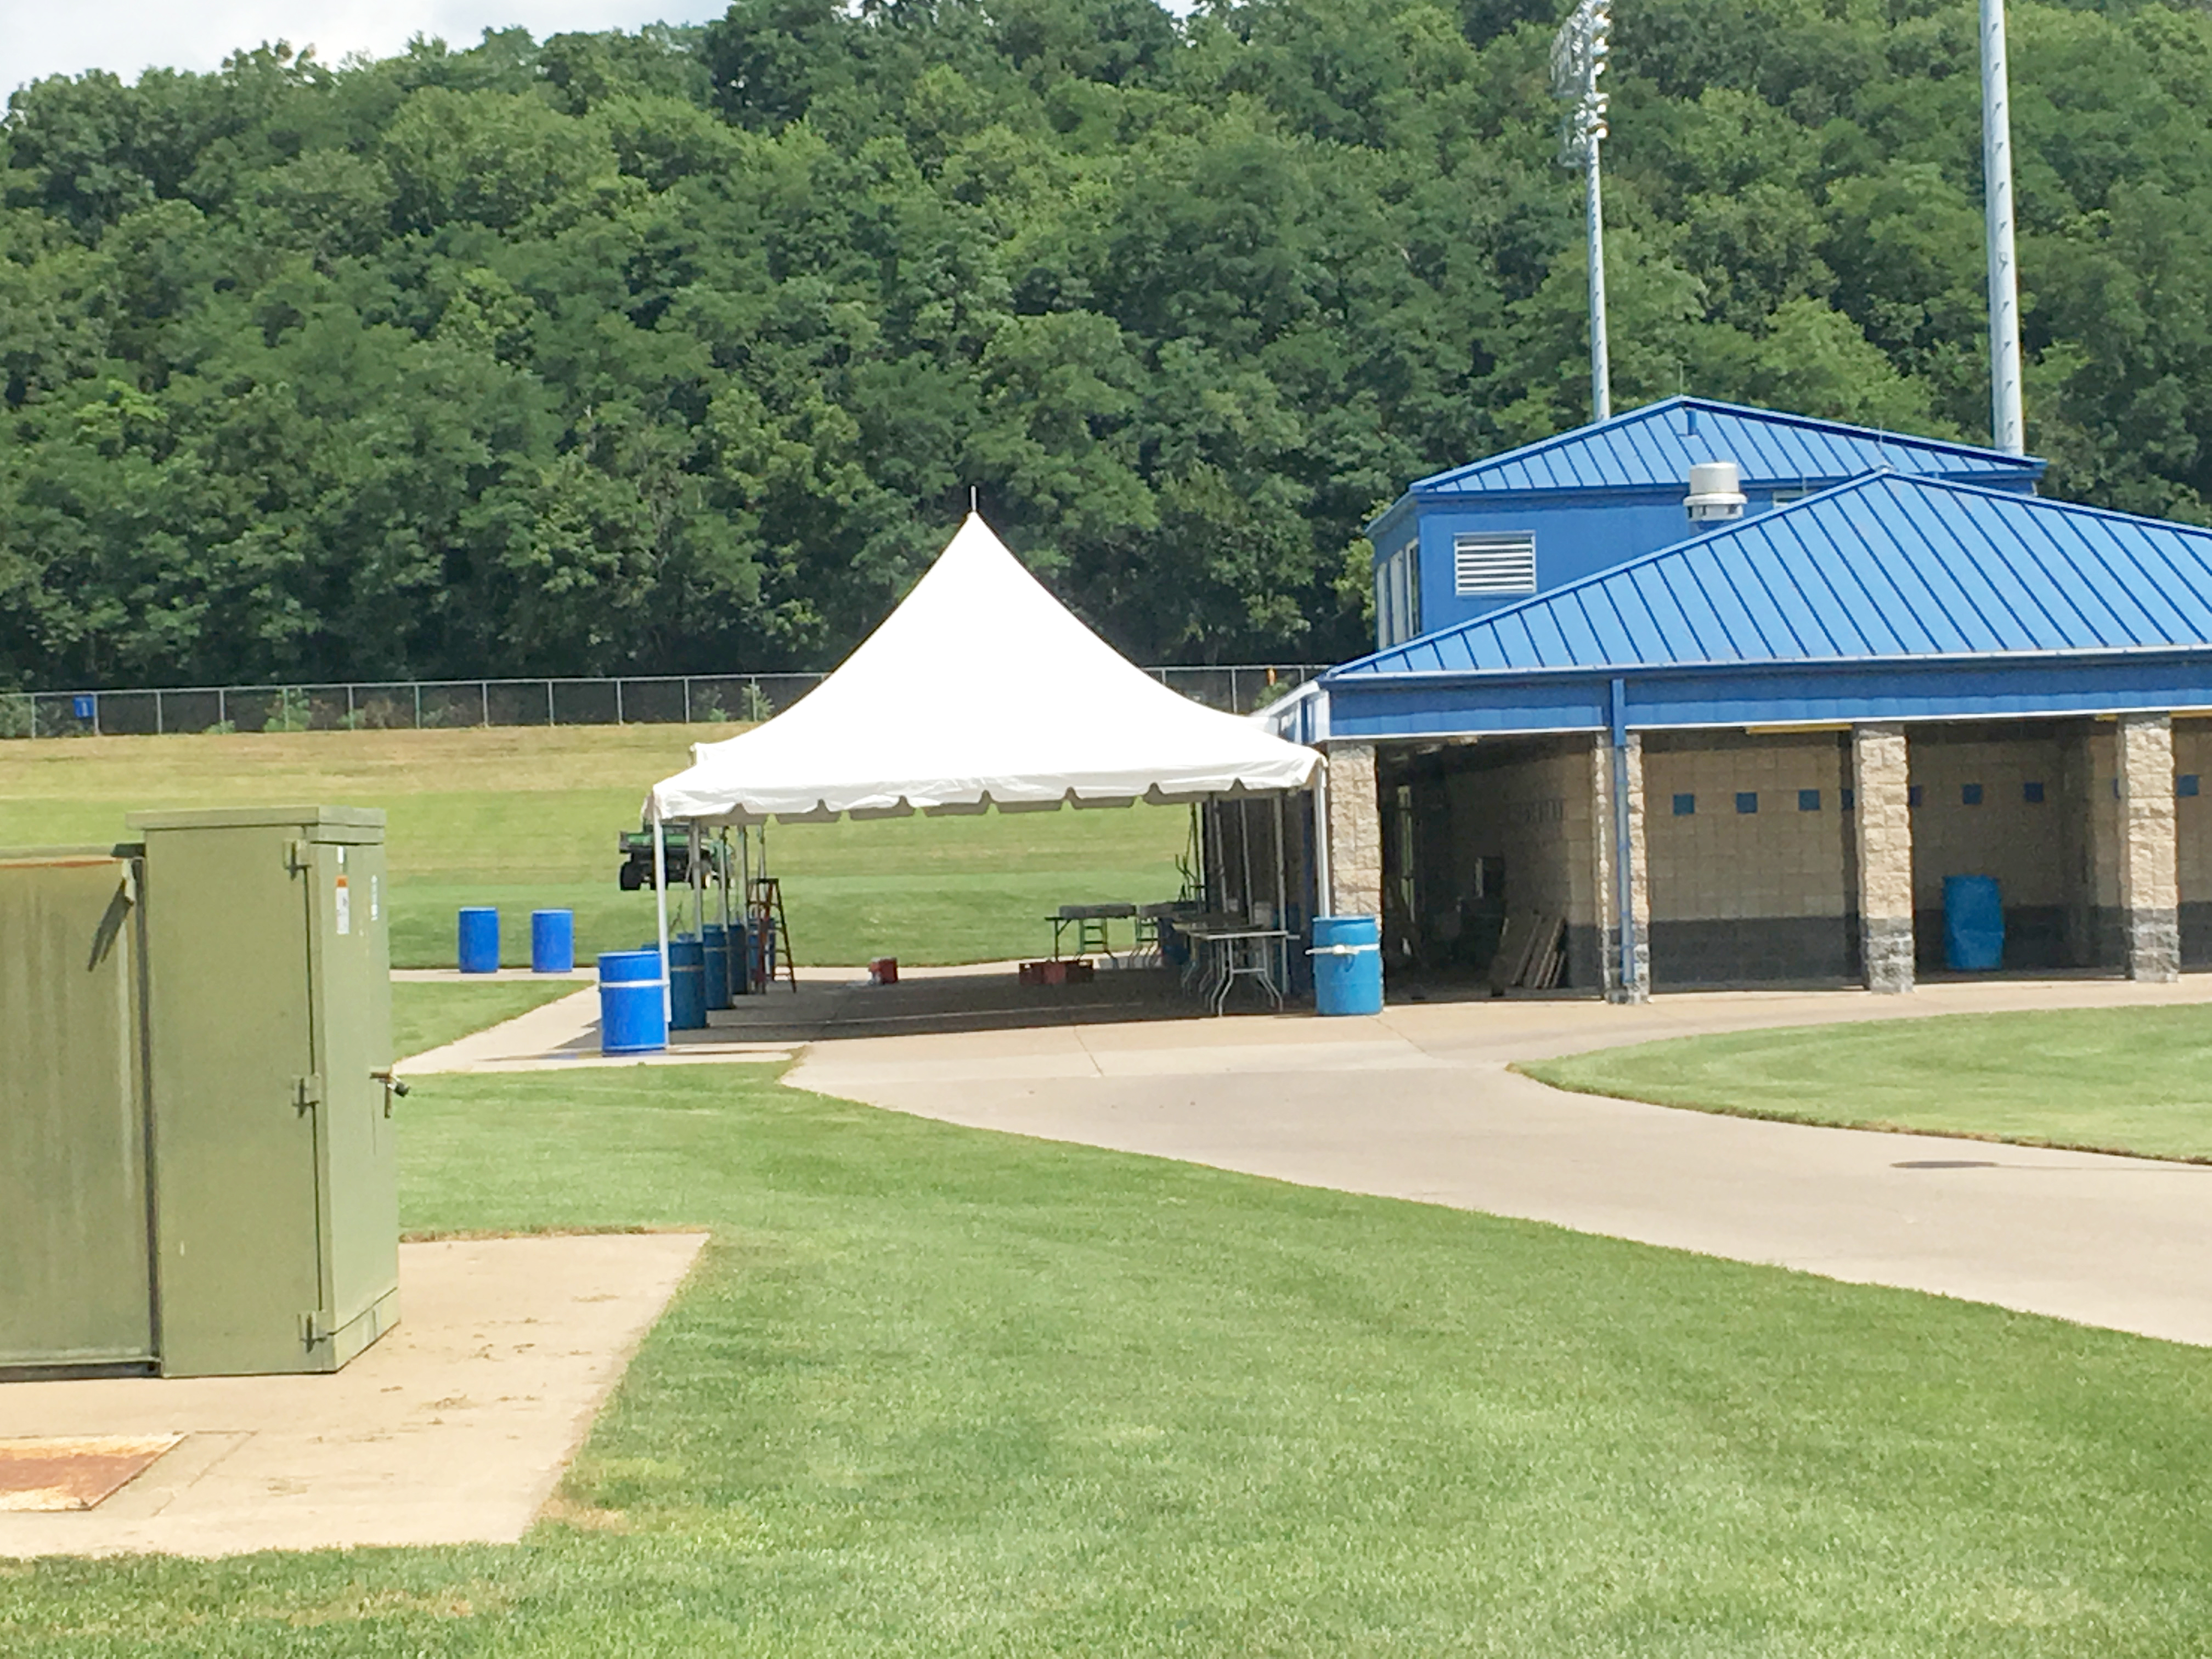 Frame tent with water barrels as ballast at the Muscatine Soccer Complex